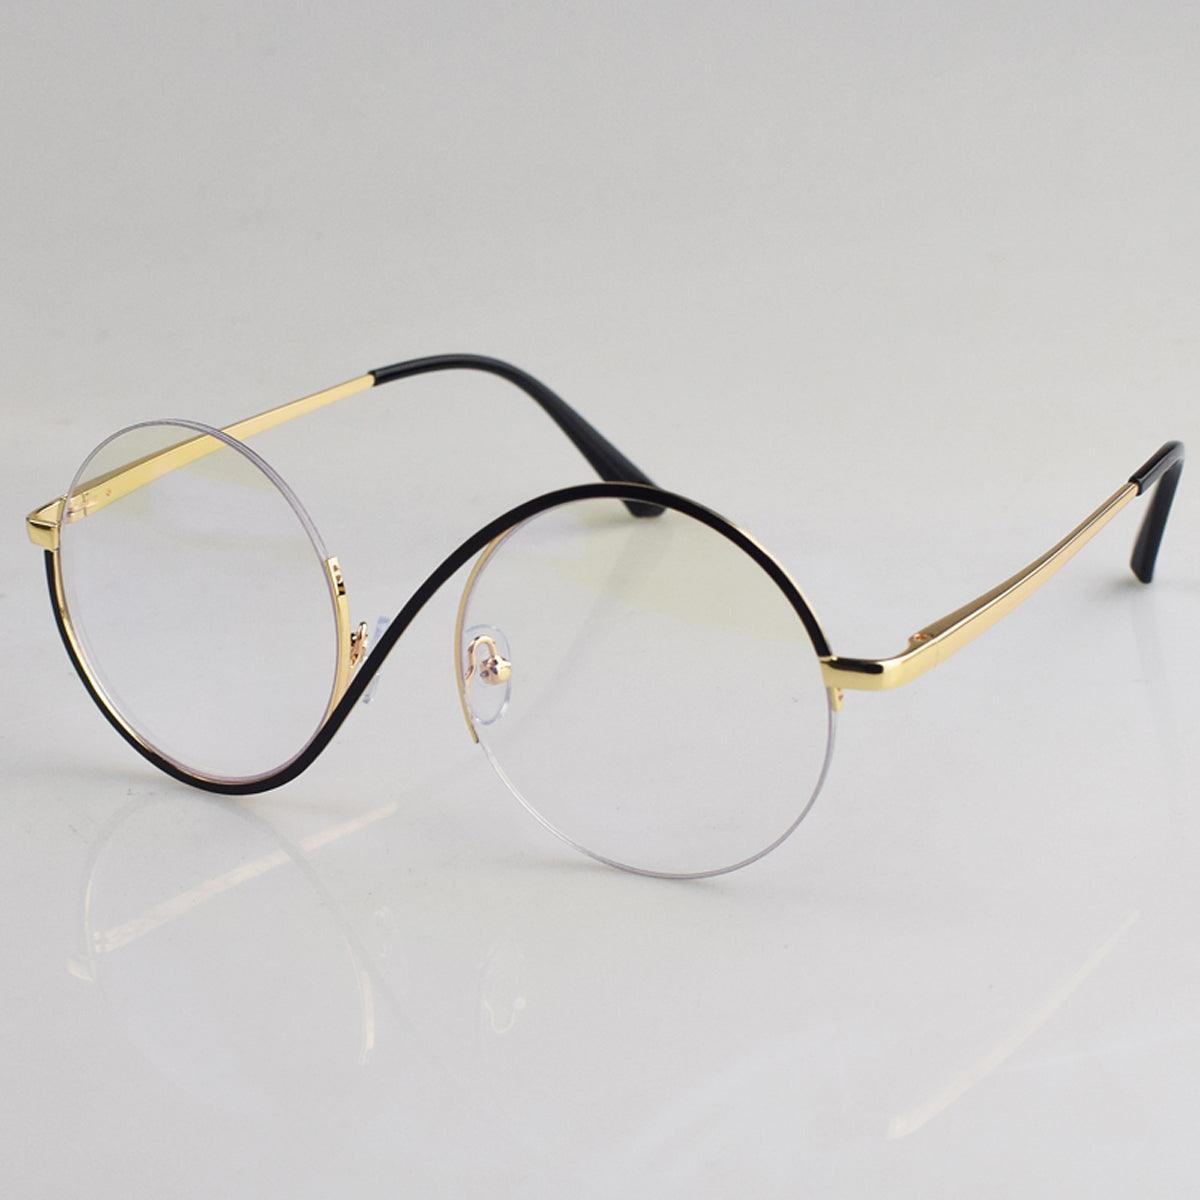 S Frame Curved Round Glasses • Aesthetic Clothes Shop